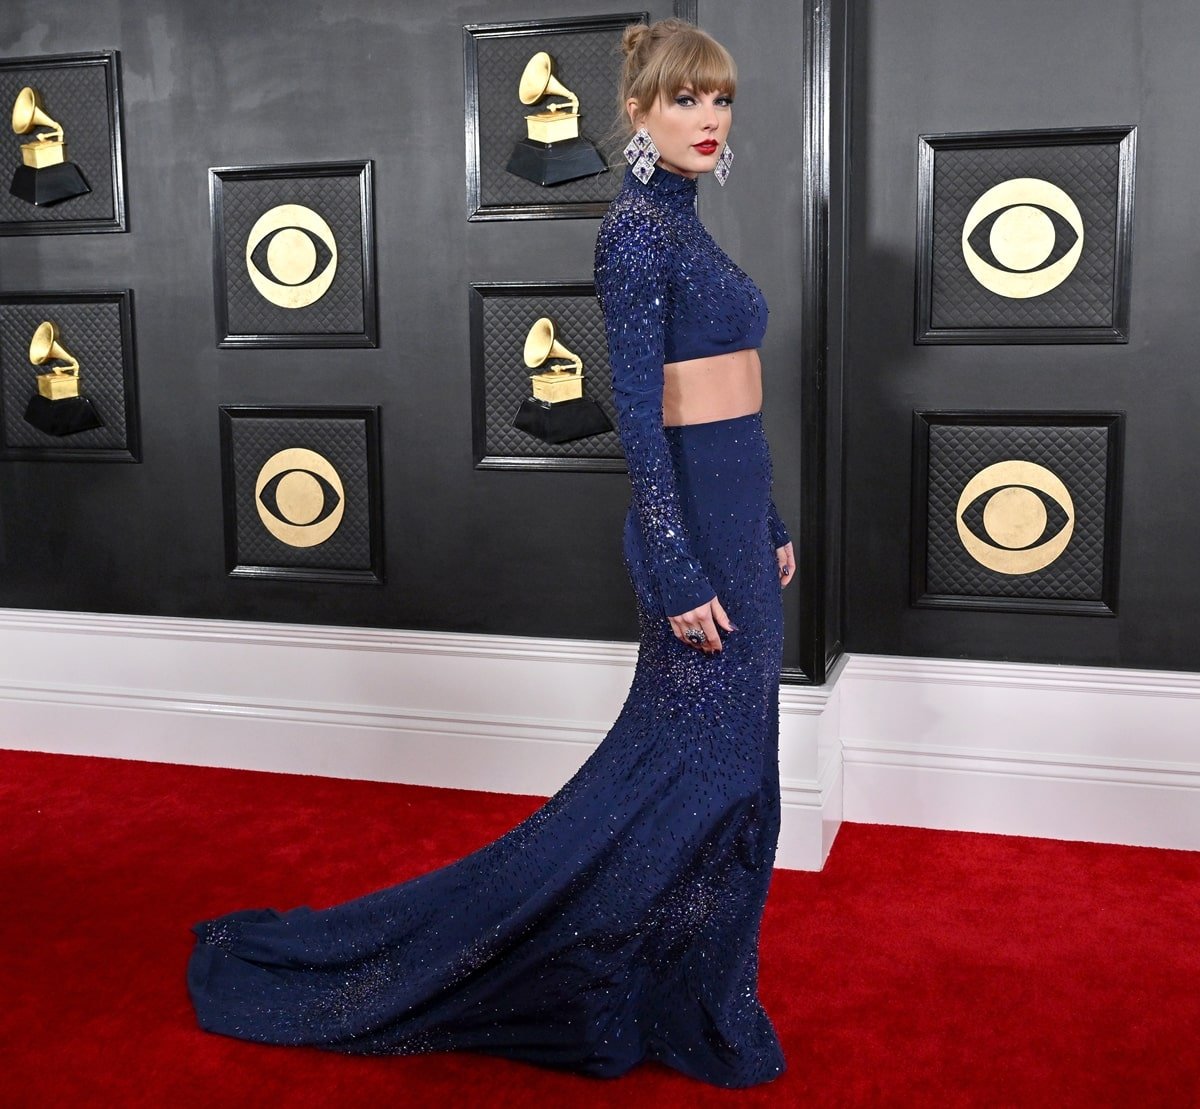 At the 2023 Grammys held in Los Angeles on February 5, 2023, Taylor Swift arrived in a stunning blue ensemble designed by Roberto Cavalli